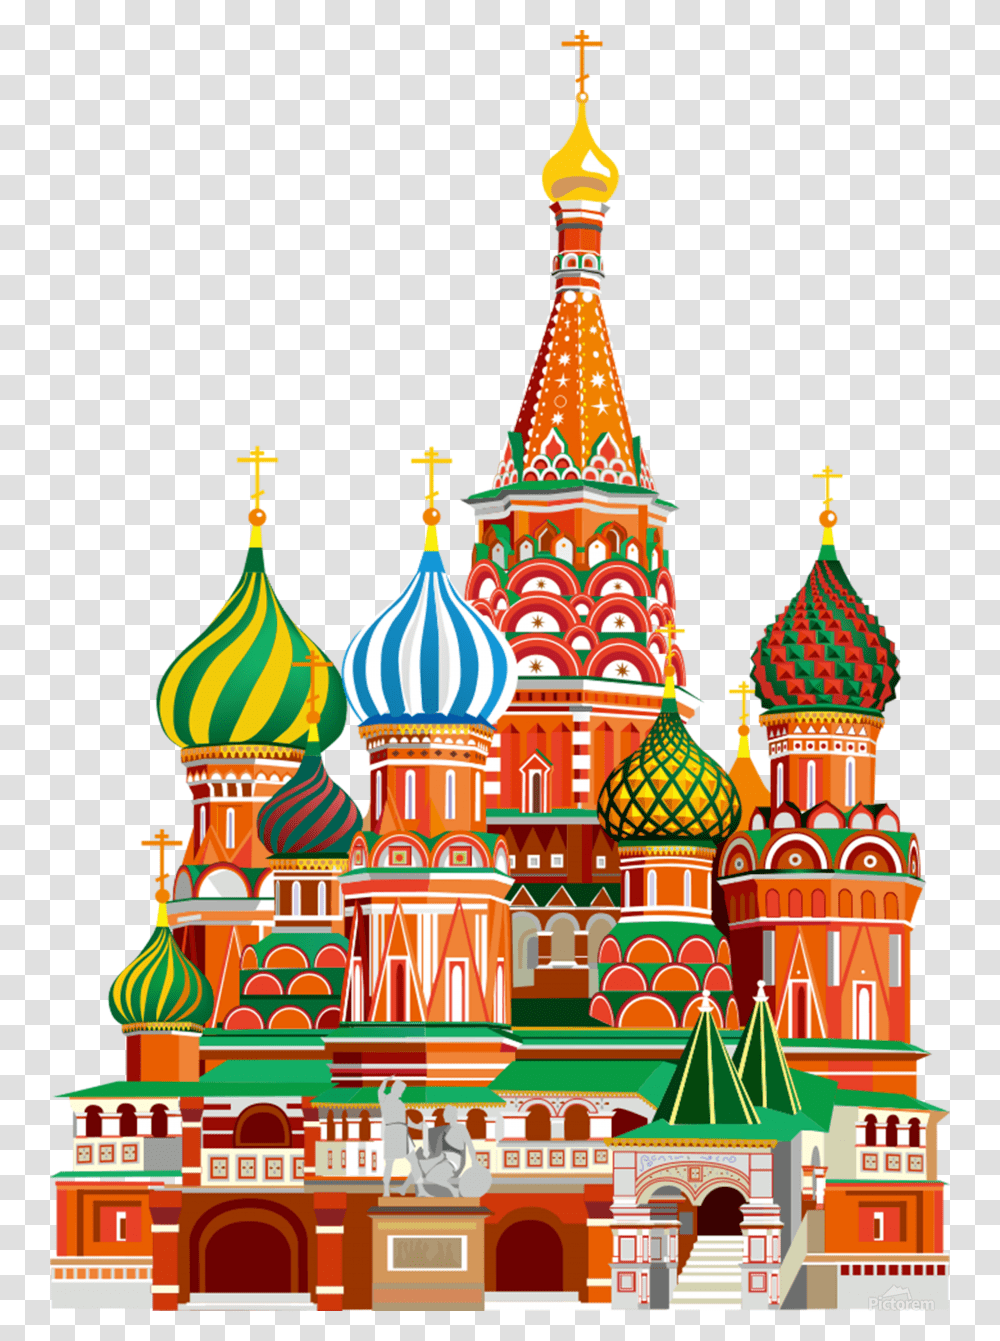 Building Basils Square Moscow Illustration Vector Saint Red Square Moscow, Architecture, Spire, Tower, Dome Transparent Png